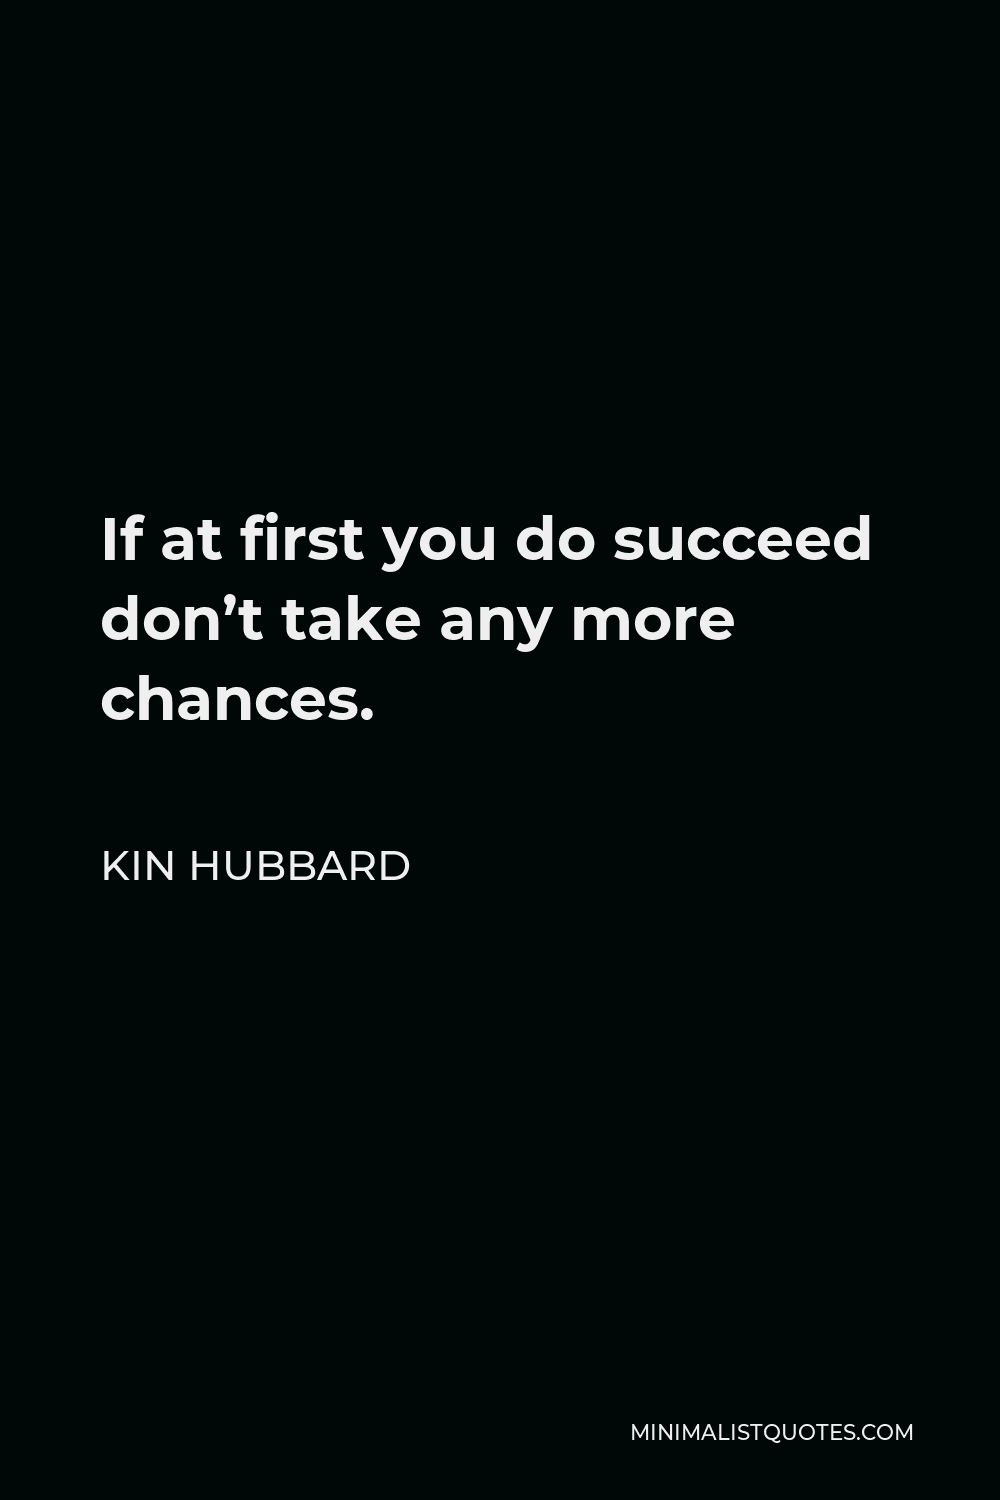 Kin Hubbard Quote - If at first you do succeed don’t take any more chances.